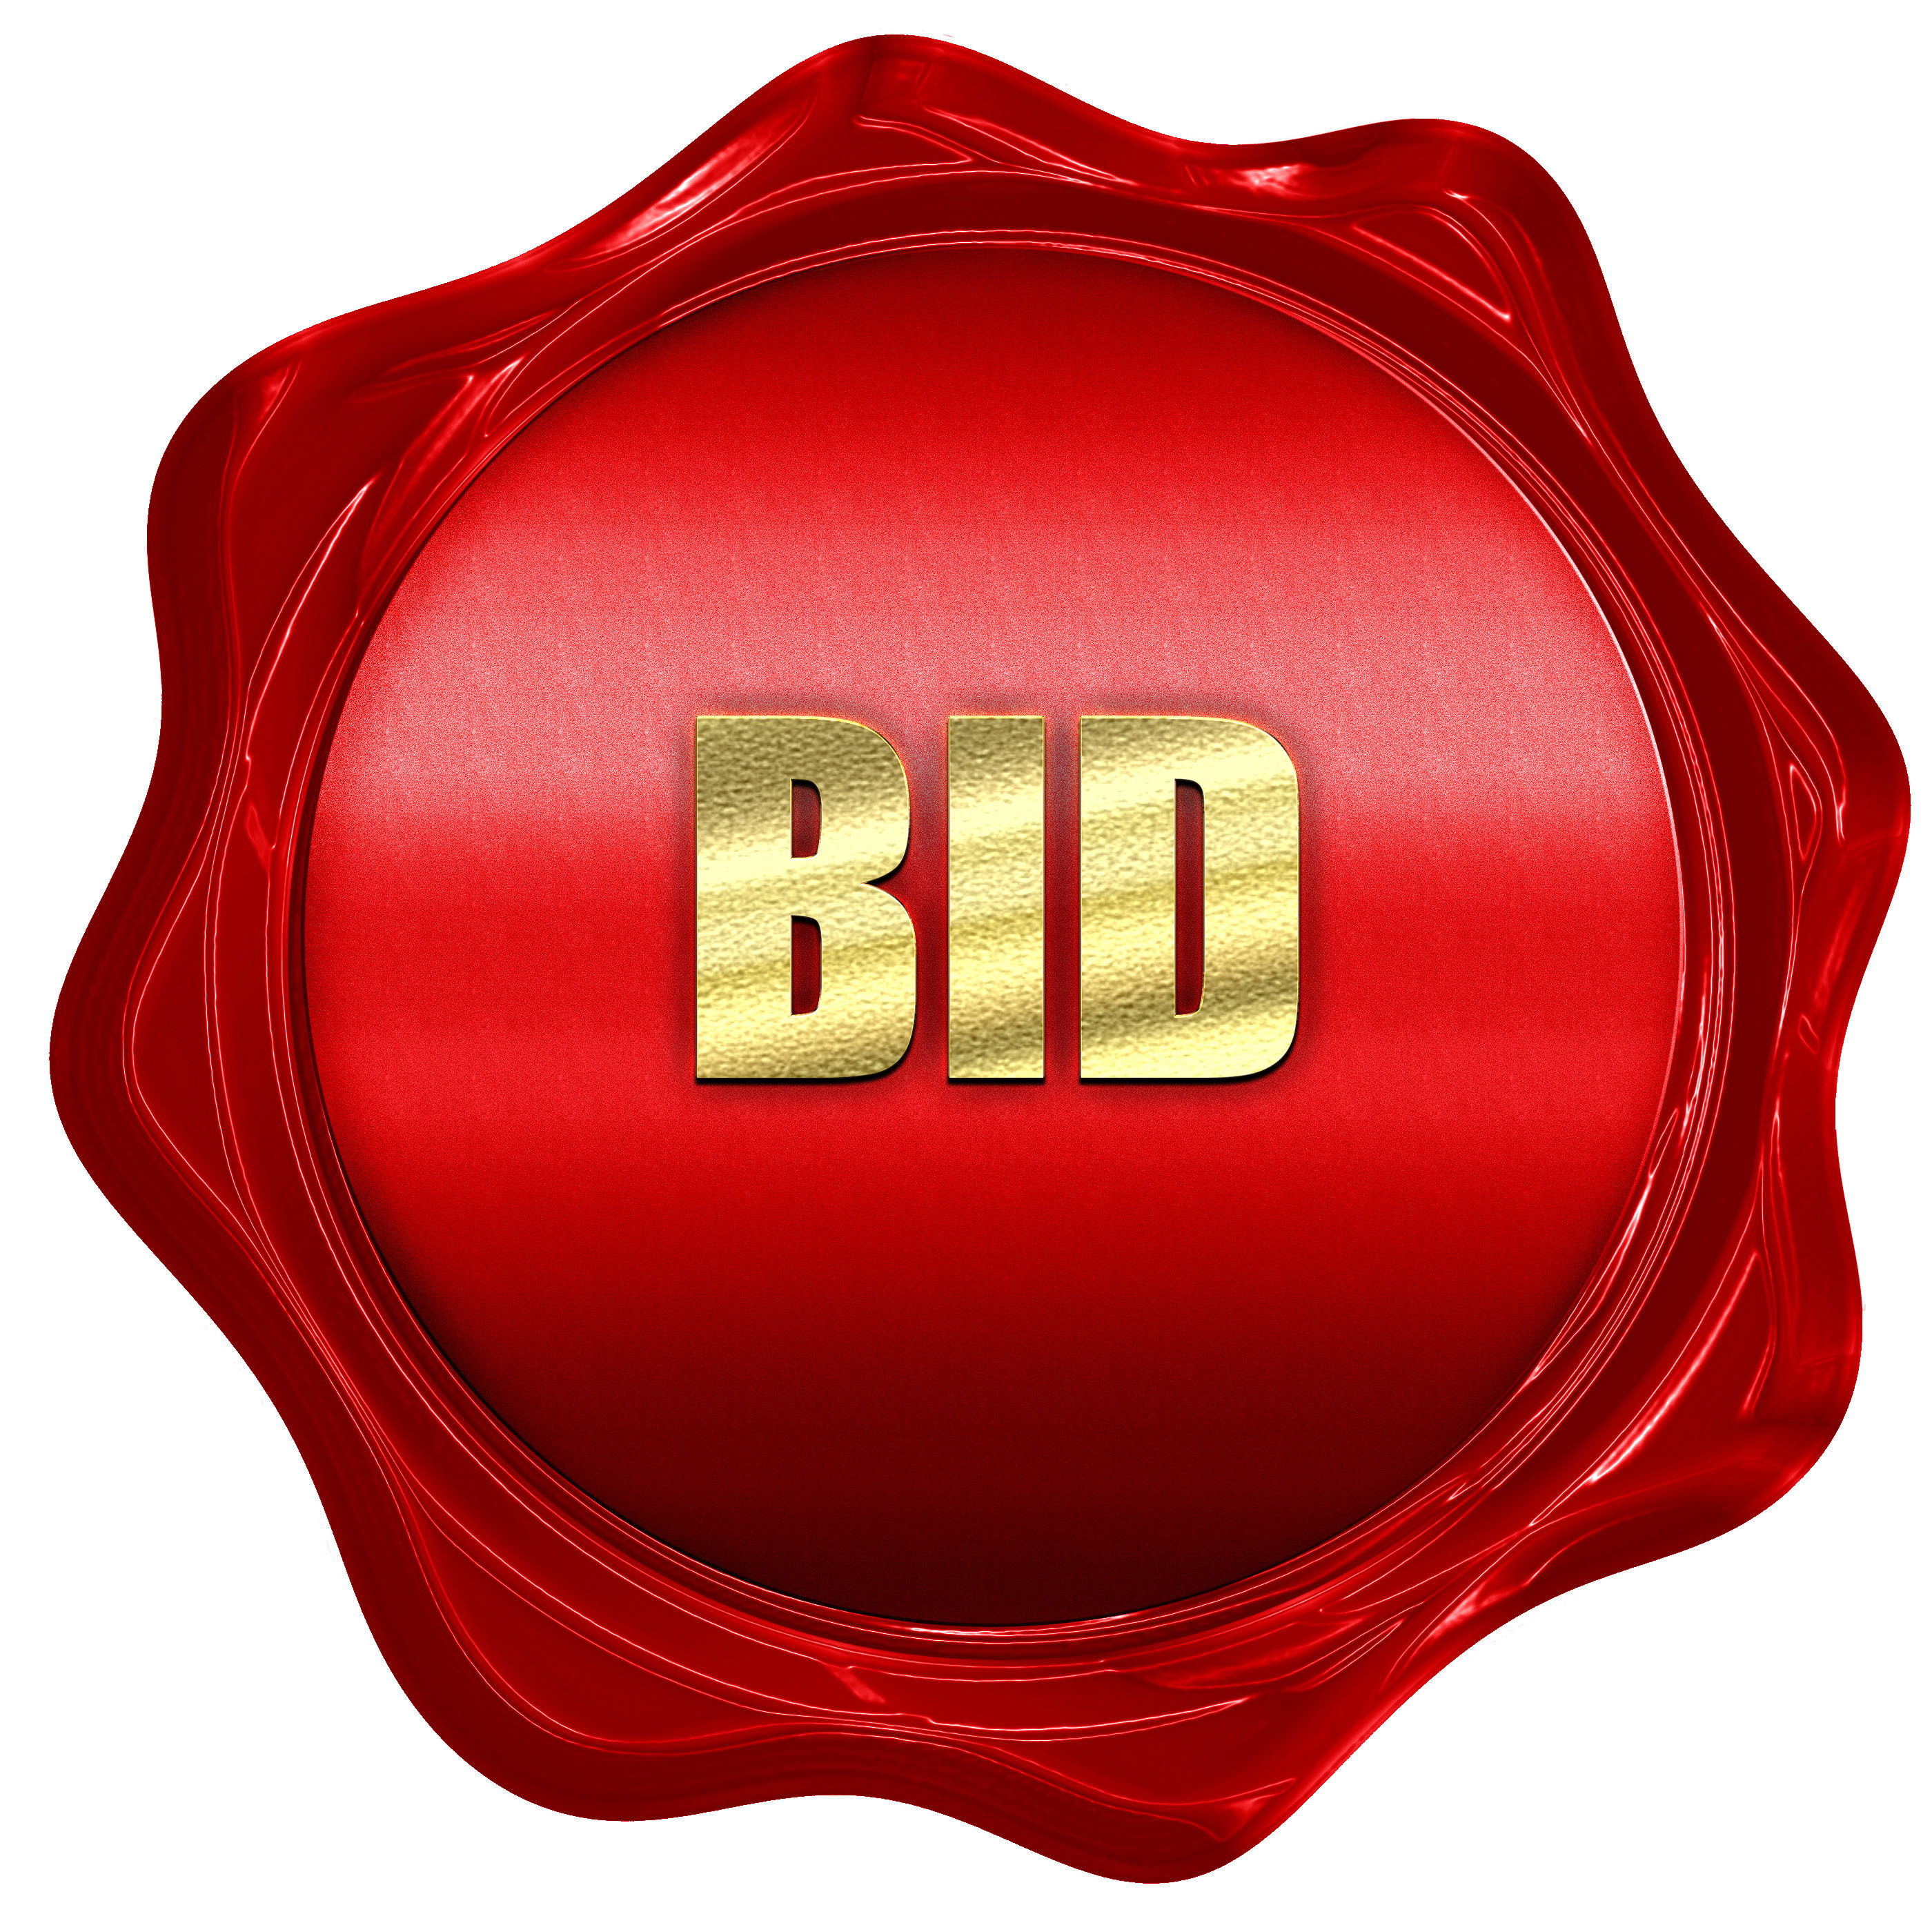 bid, 3D rendering, red wax stamp with text